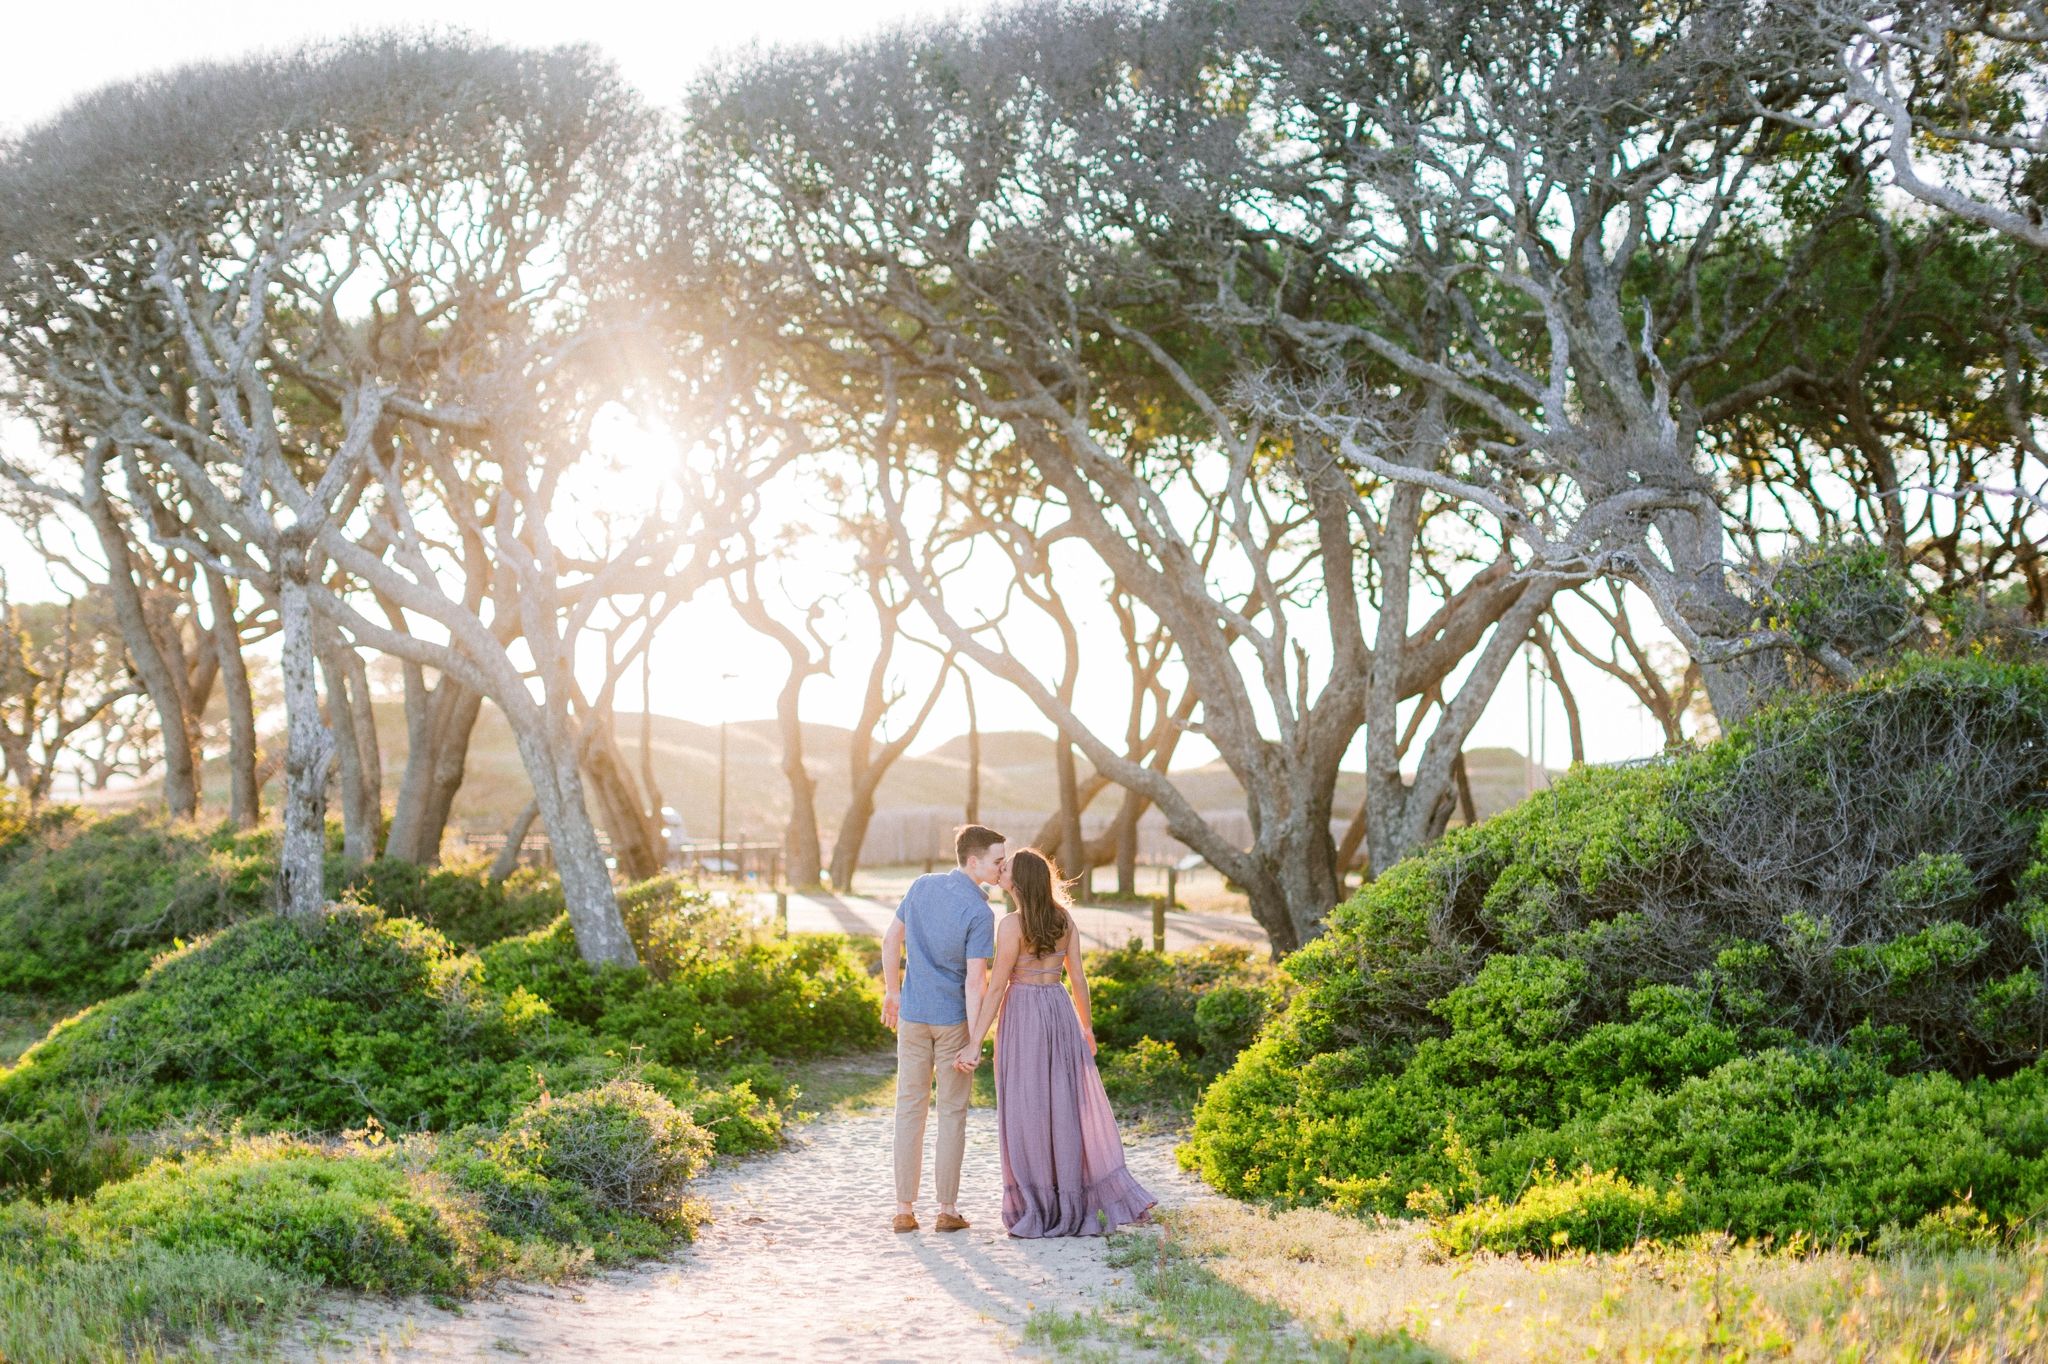  a couple walking towards the sun in front of live oak trees with the sunset behind them - Woman is in a flowy pastel maxi dress - unposed and candid outdoor golden light session - engagement photographer in honolulu, oahu, hawaii - johanna dye 